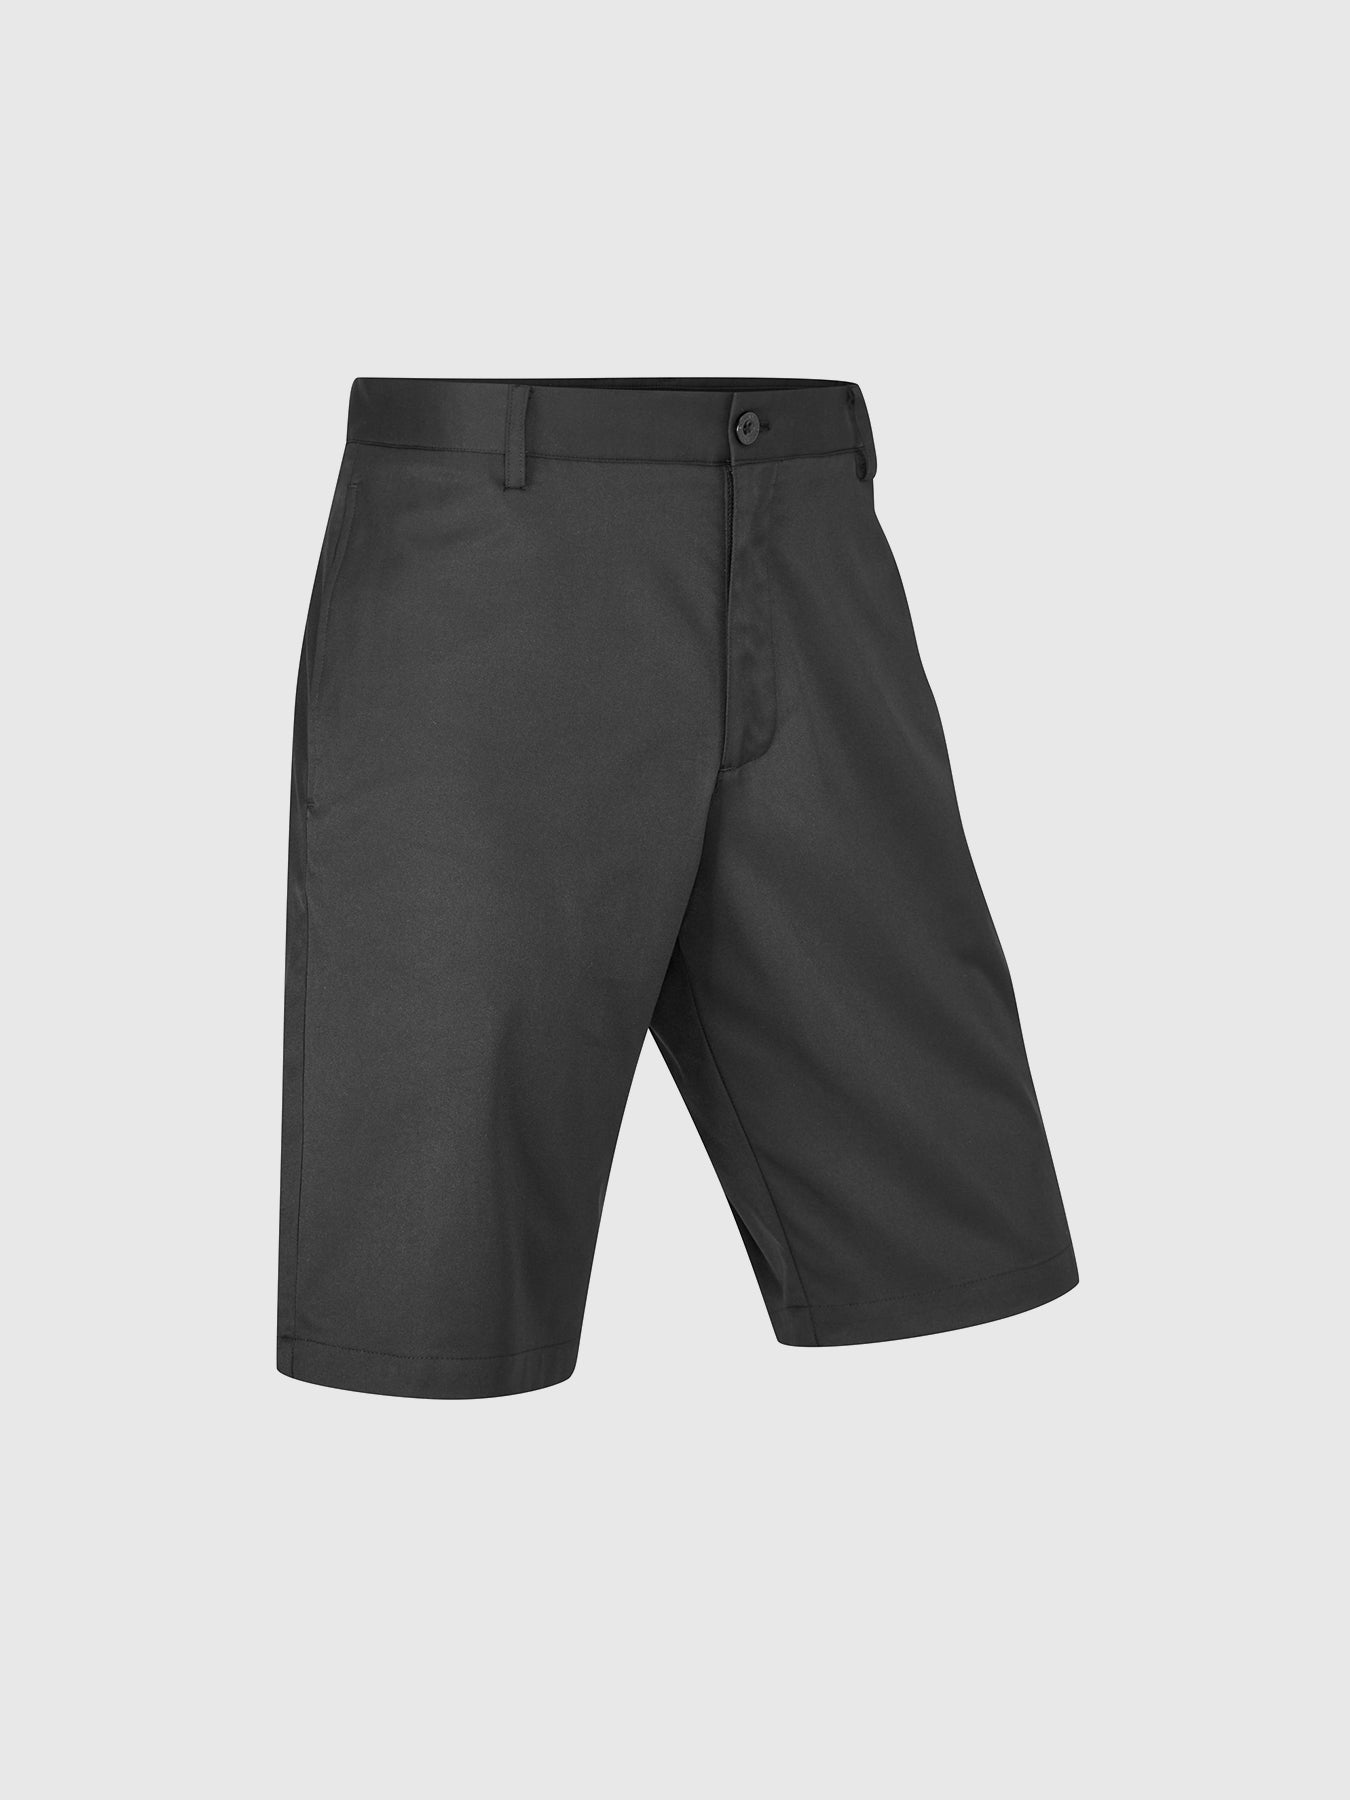 View Farah Jester Performance Piped Golf Shorts Black Mens information